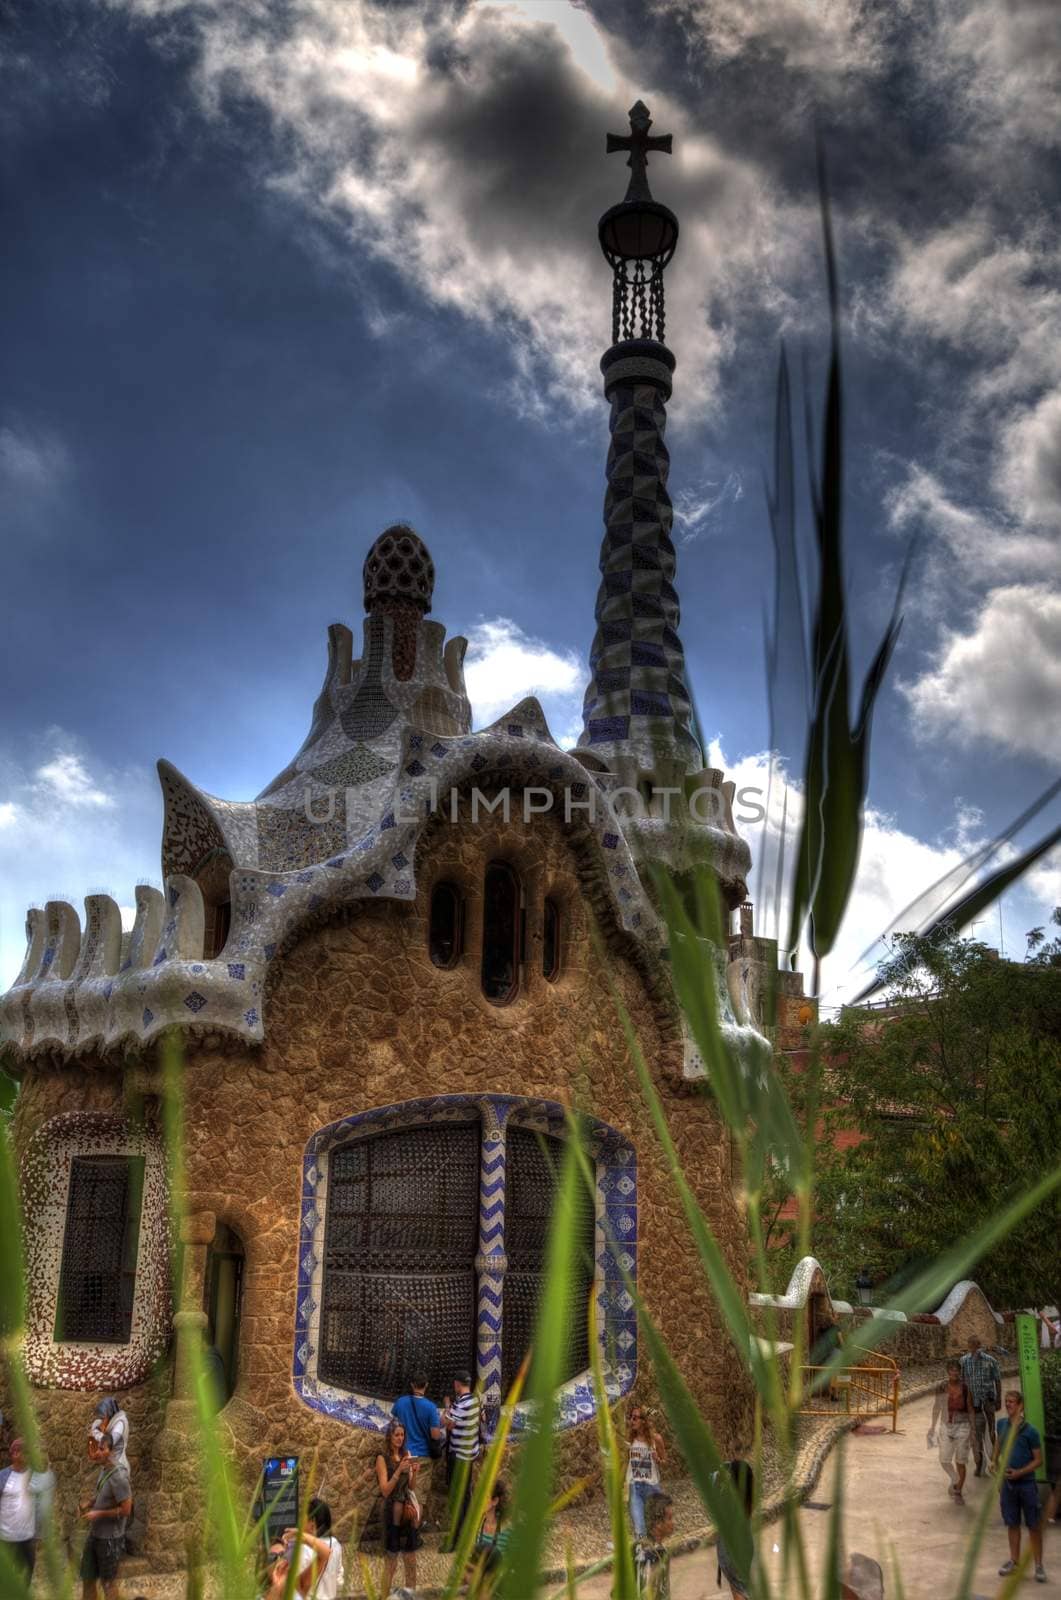 Barcelona, Spain - September 21, 2015: Trencalis covered Gatehouse at entrance to Parc Guell HDR